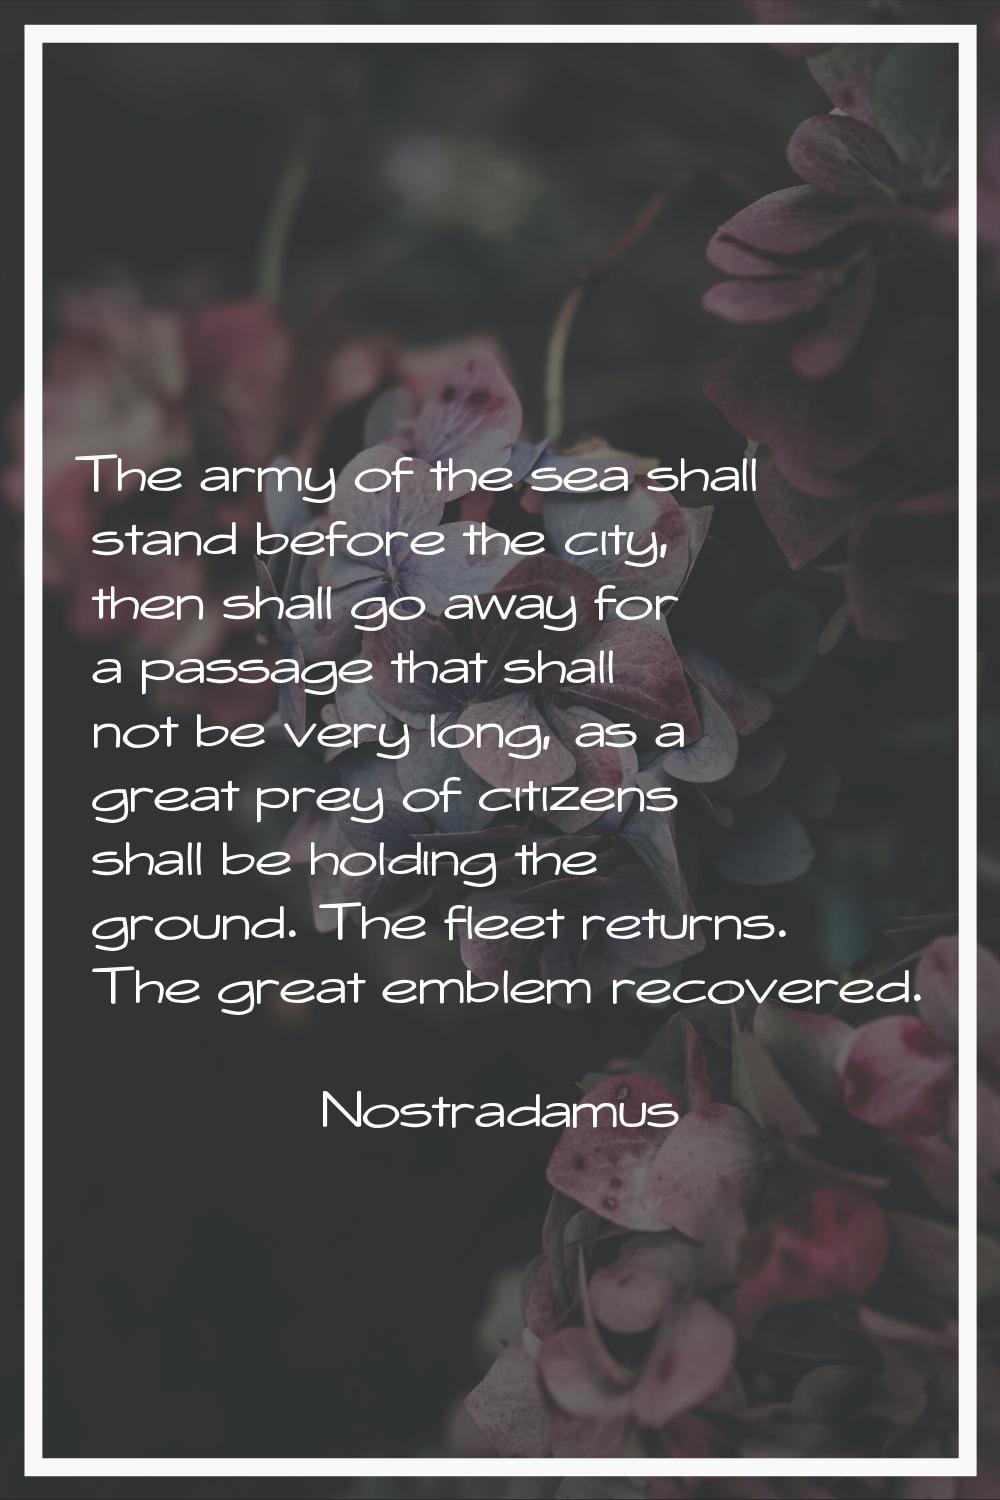 The army of the sea shall stand before the city, then shall go away for a passage that shall not be